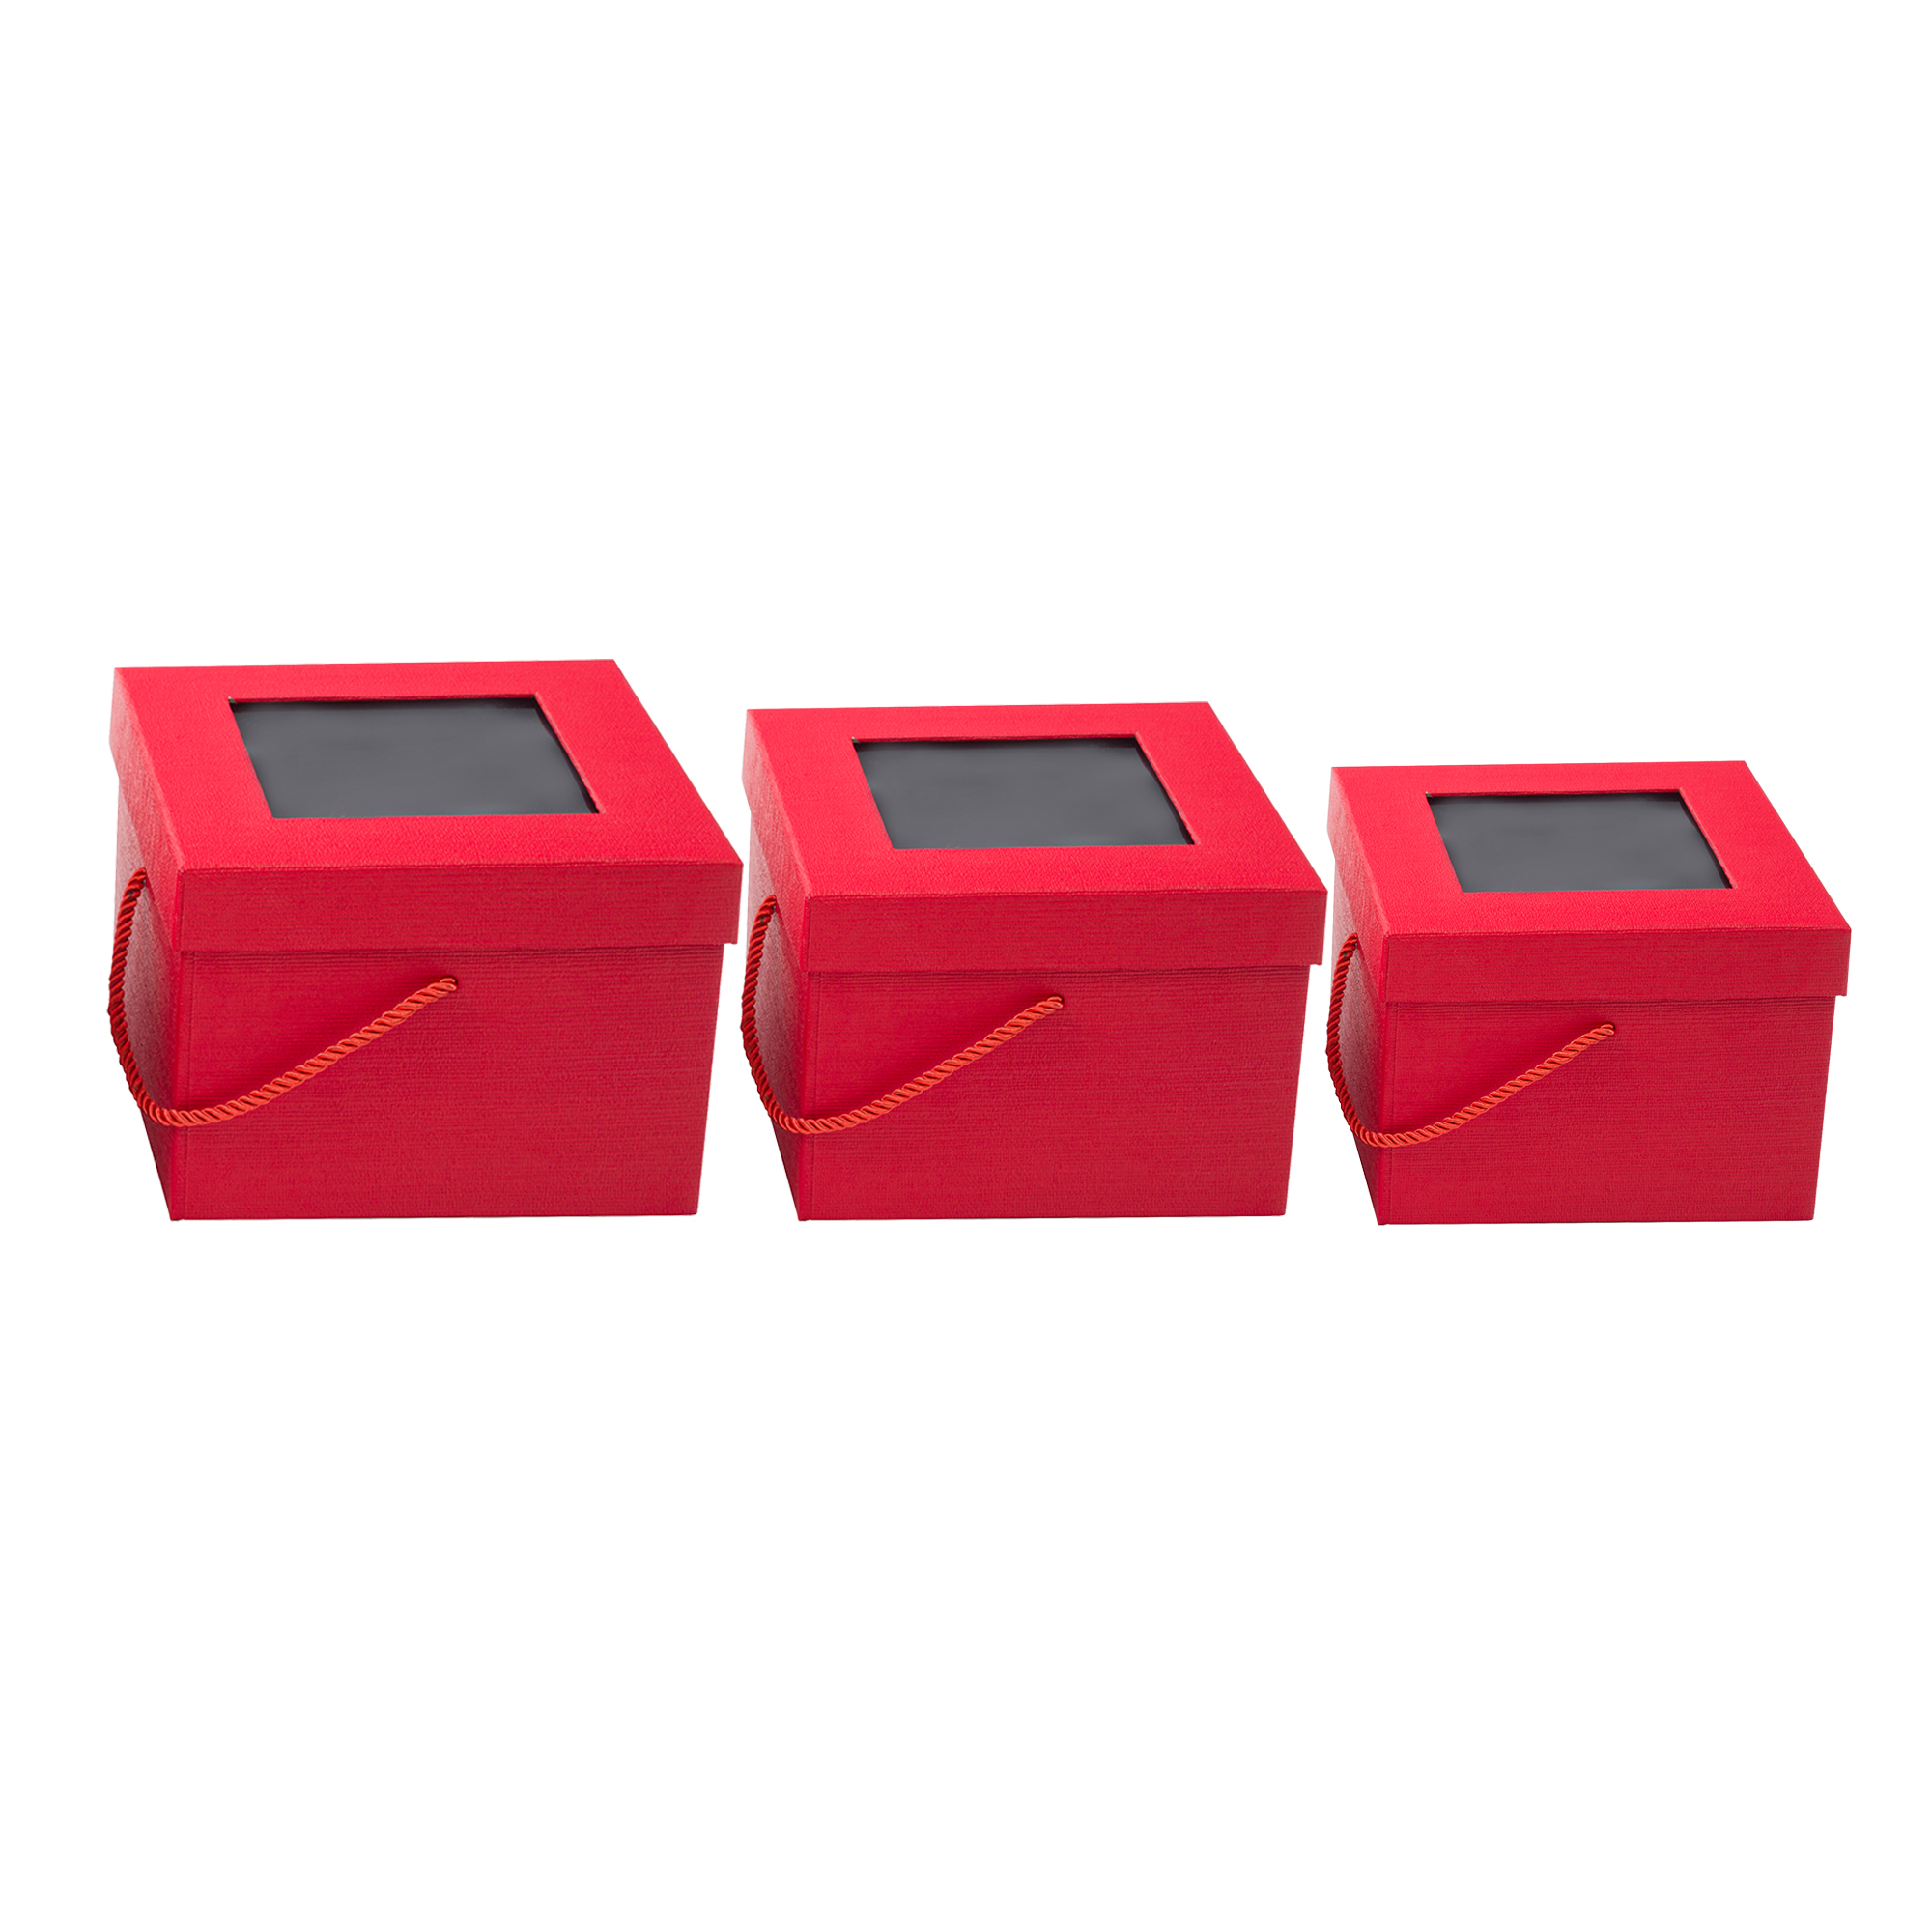 Nested Square Floral Boxes 3pc/set - All Red